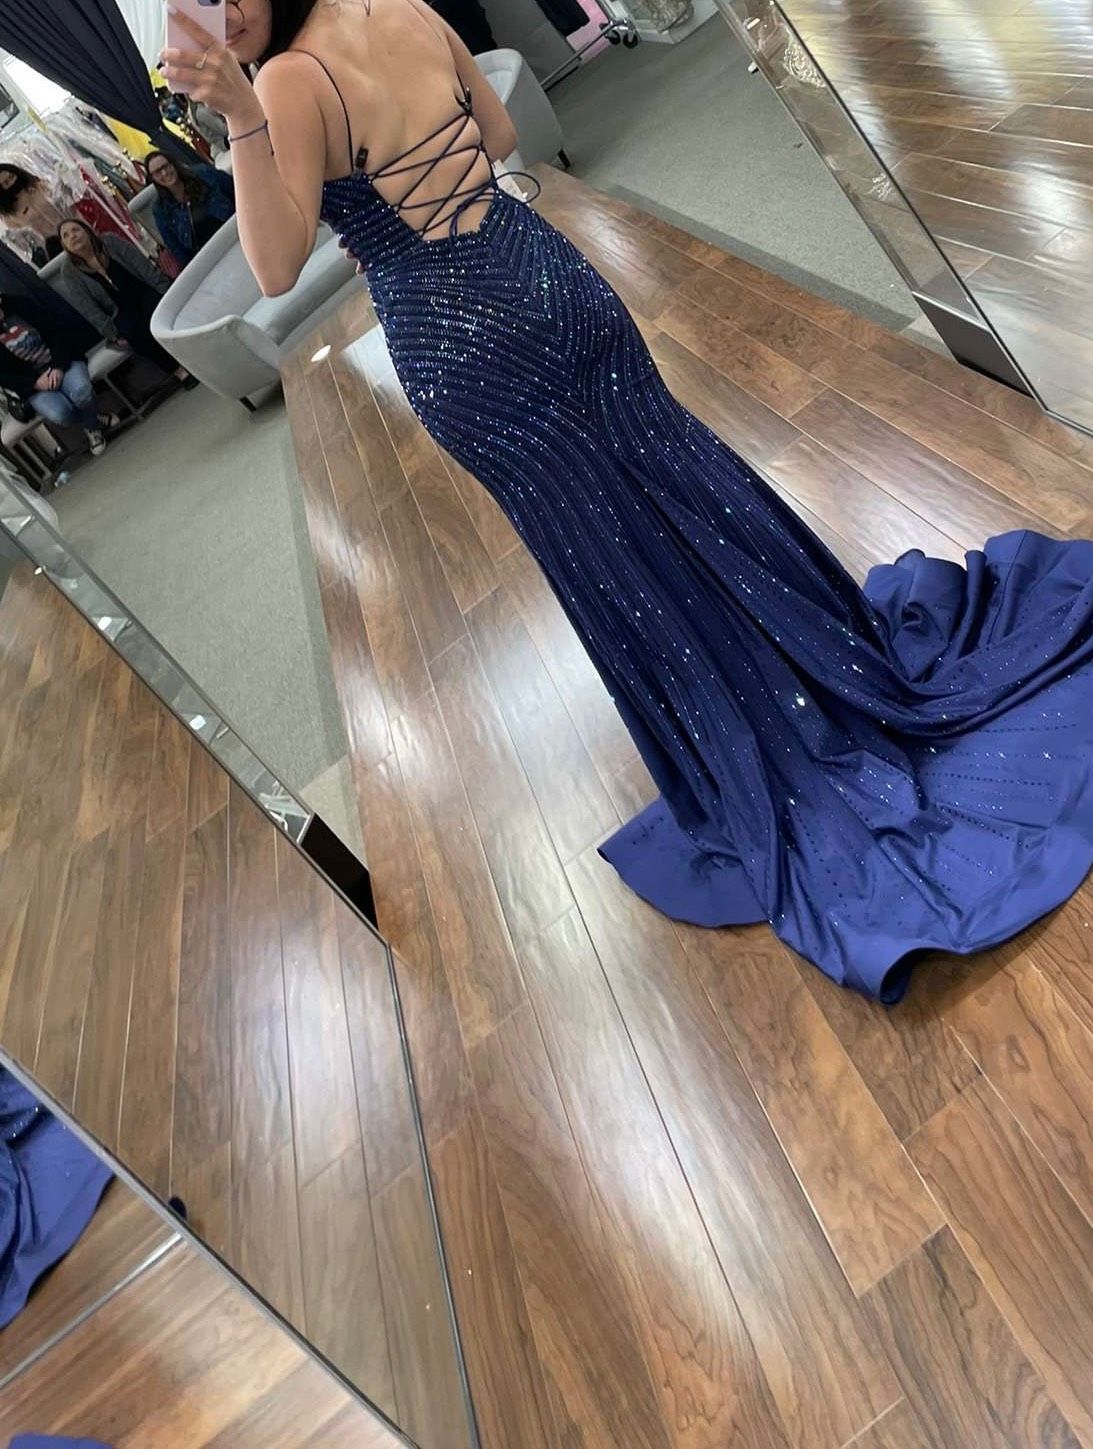 Sherri Hill Size 2 Prom Sequined Royal Blue A-line Dress on Queenly